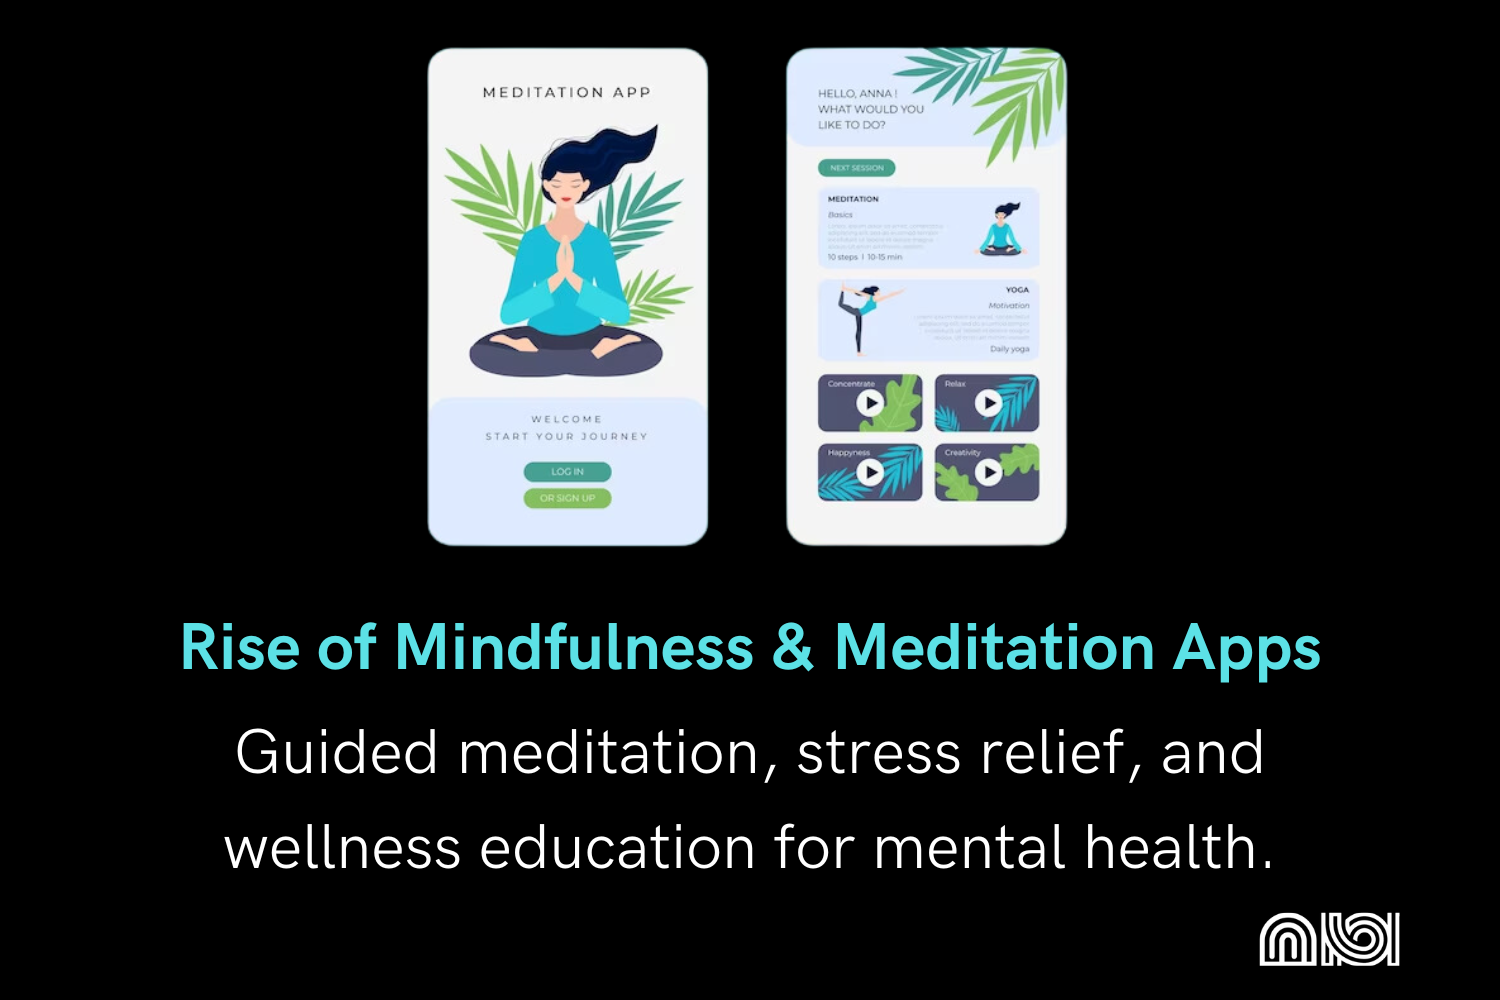 Illustration of people using mindfulness and meditation apps for mental wellness and relaxation.